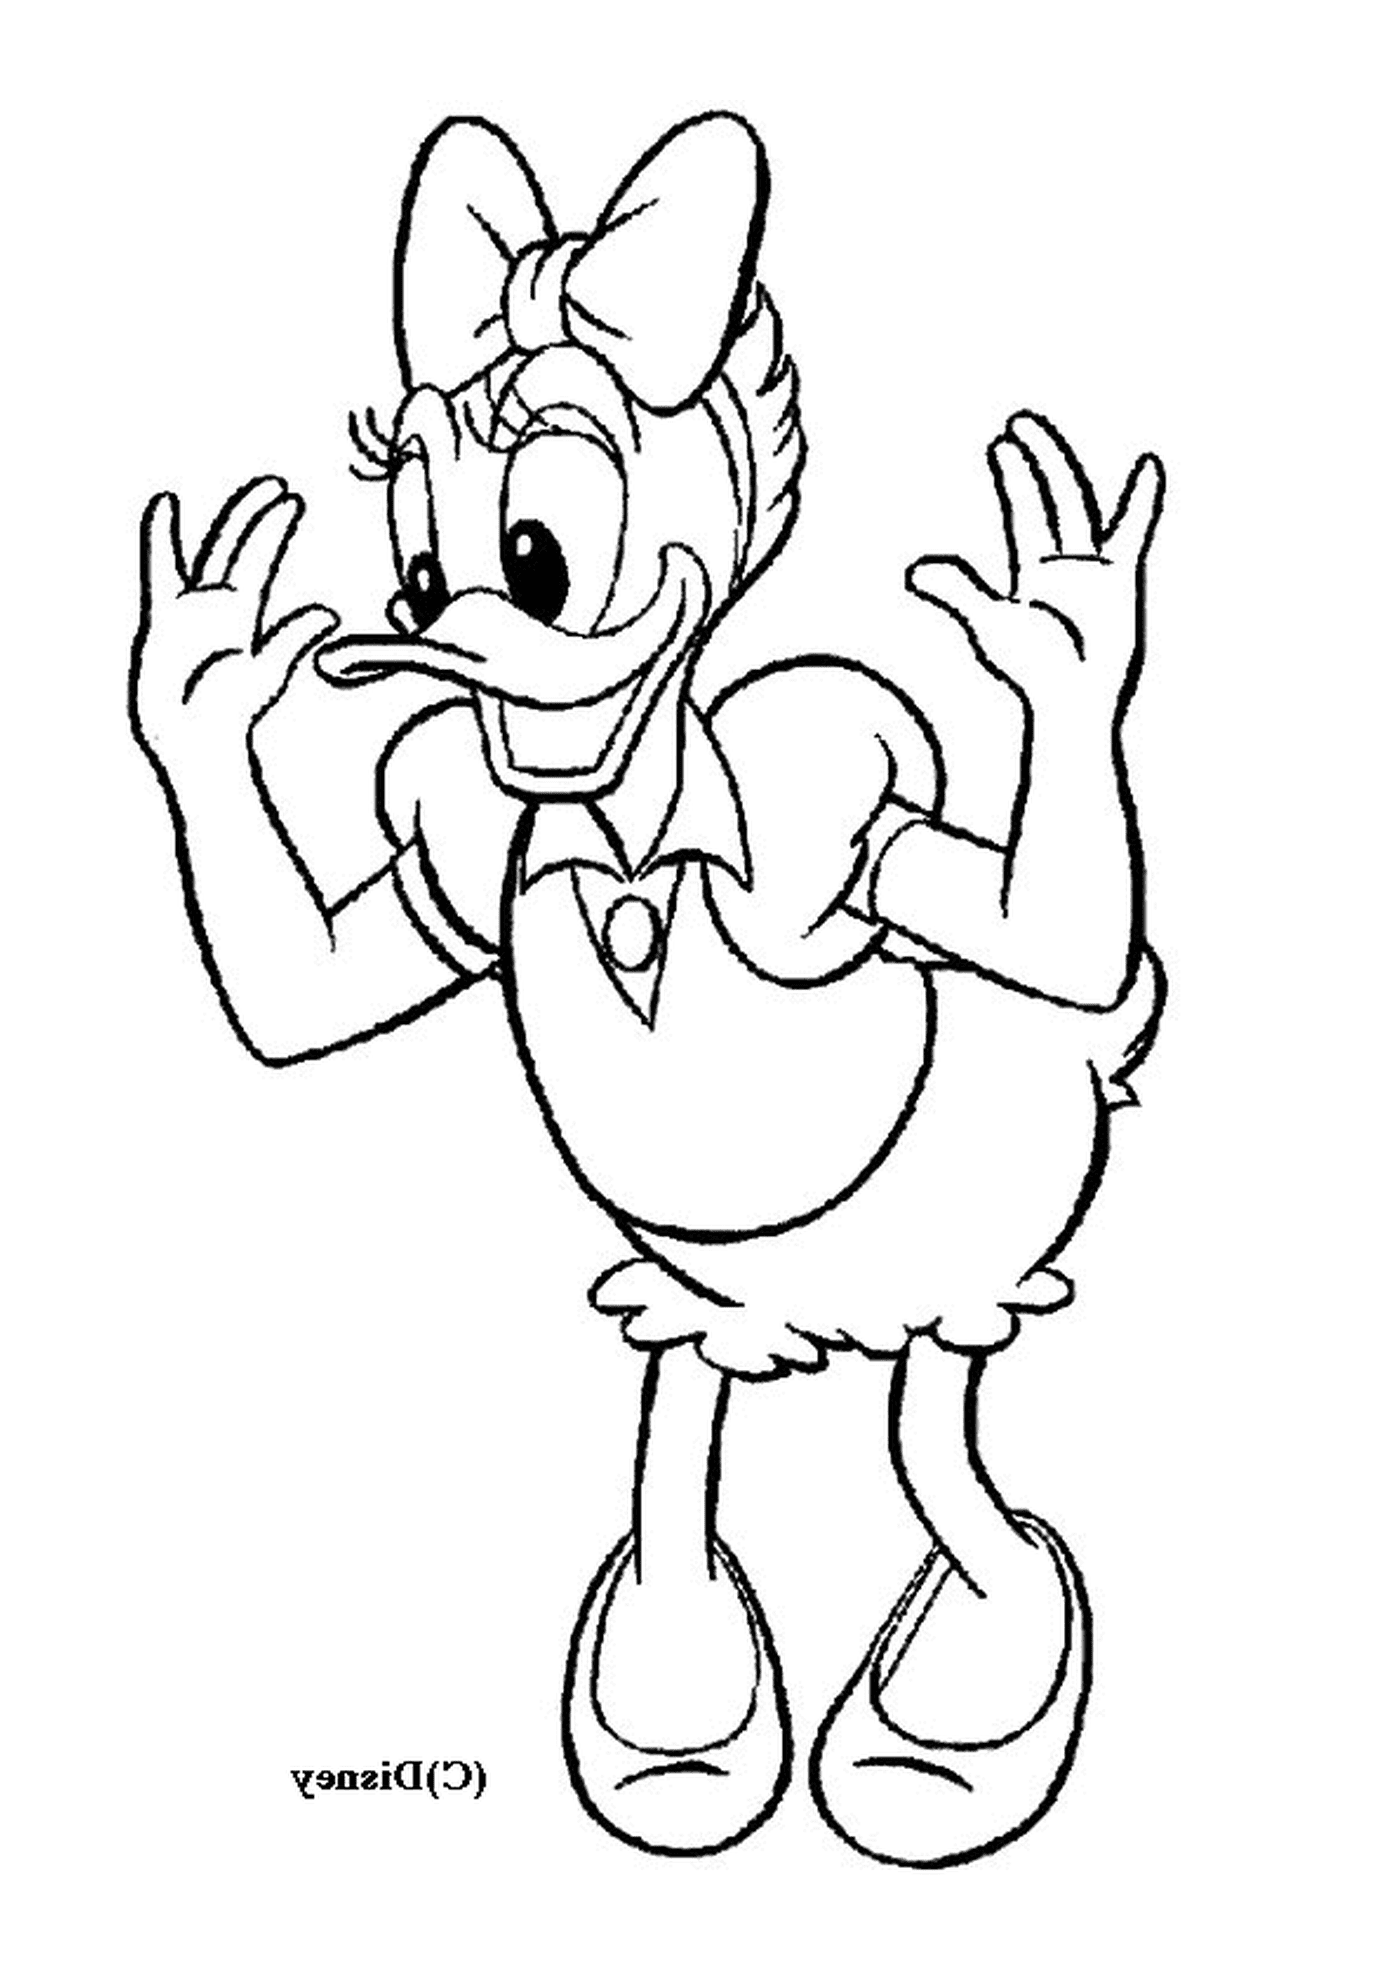 Donald Duck Coloring Pages: 71 Printable Drawings